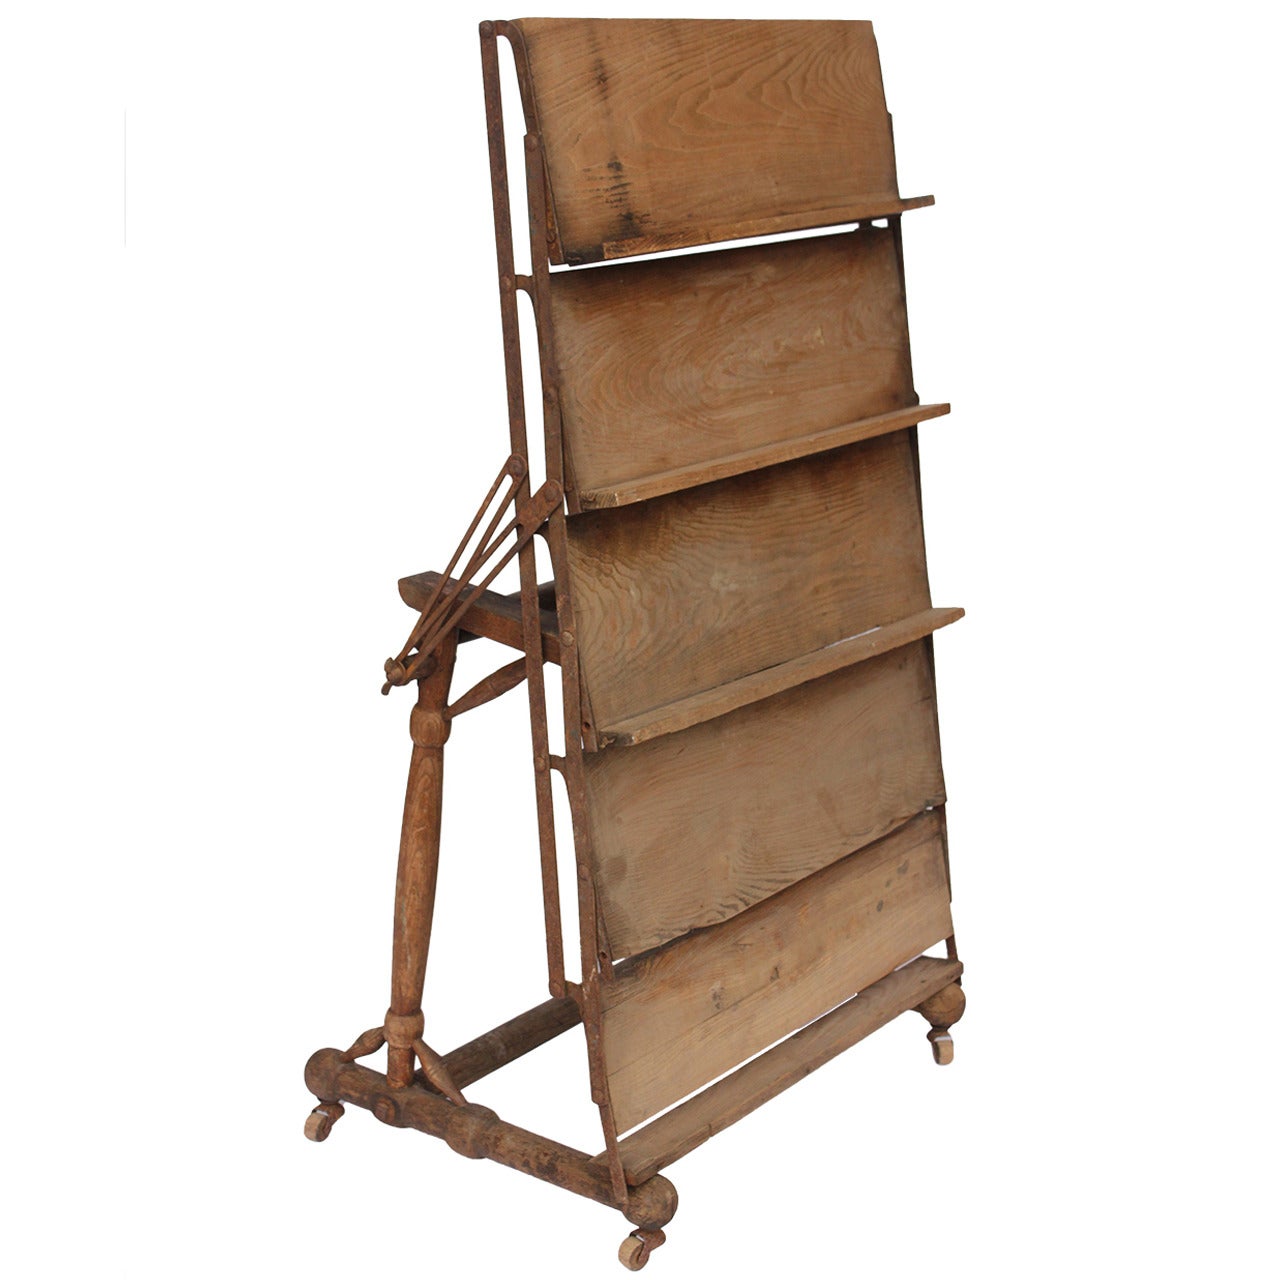 Unusual Antique Department Store Book Stand For Sale